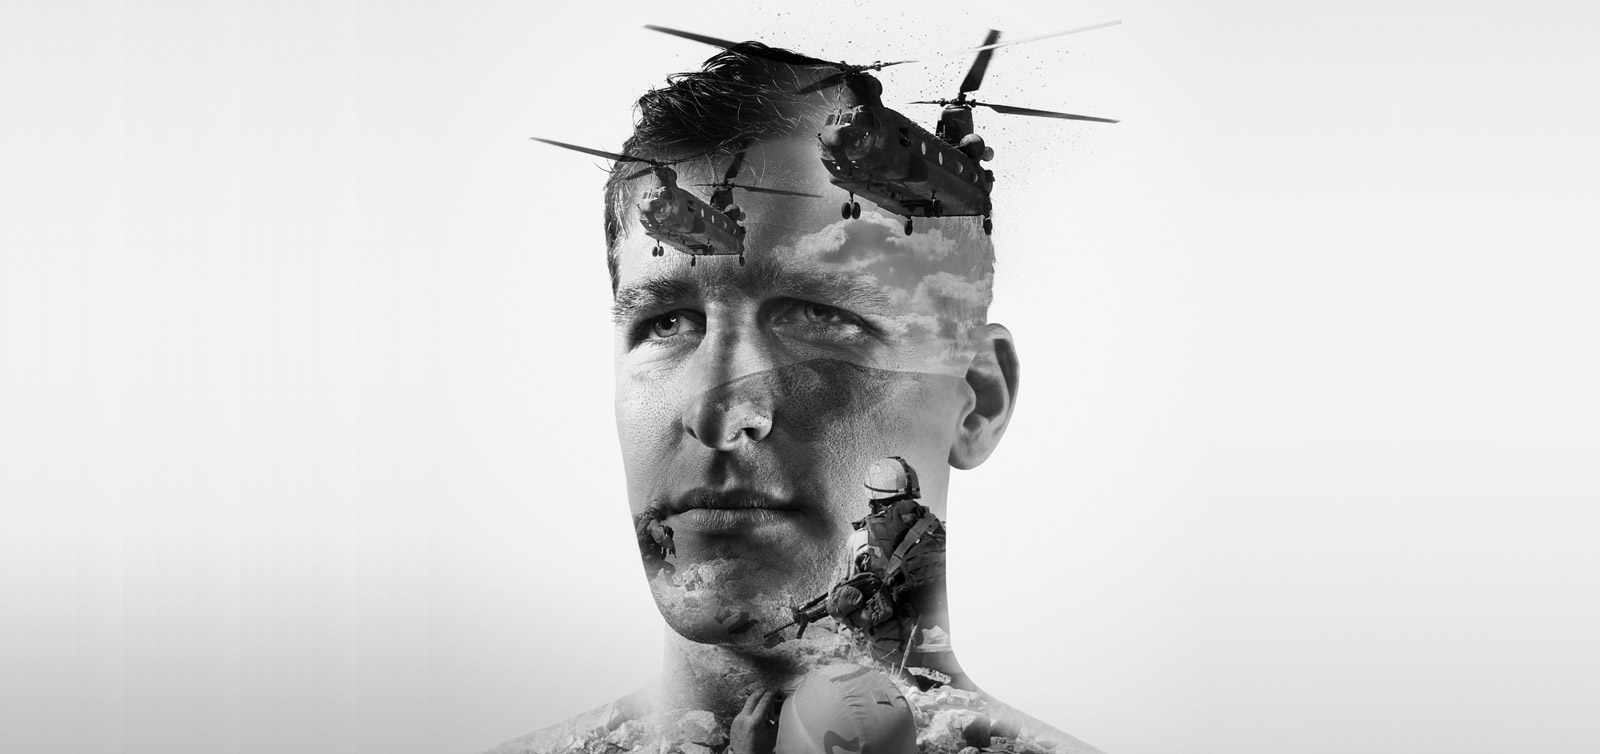 Welcome To - Walking With The Wounded  / (David Wiseman
 - Image of David Wiseman veteran associated with Walking With The Wounded - Combat Stress Charity
 )